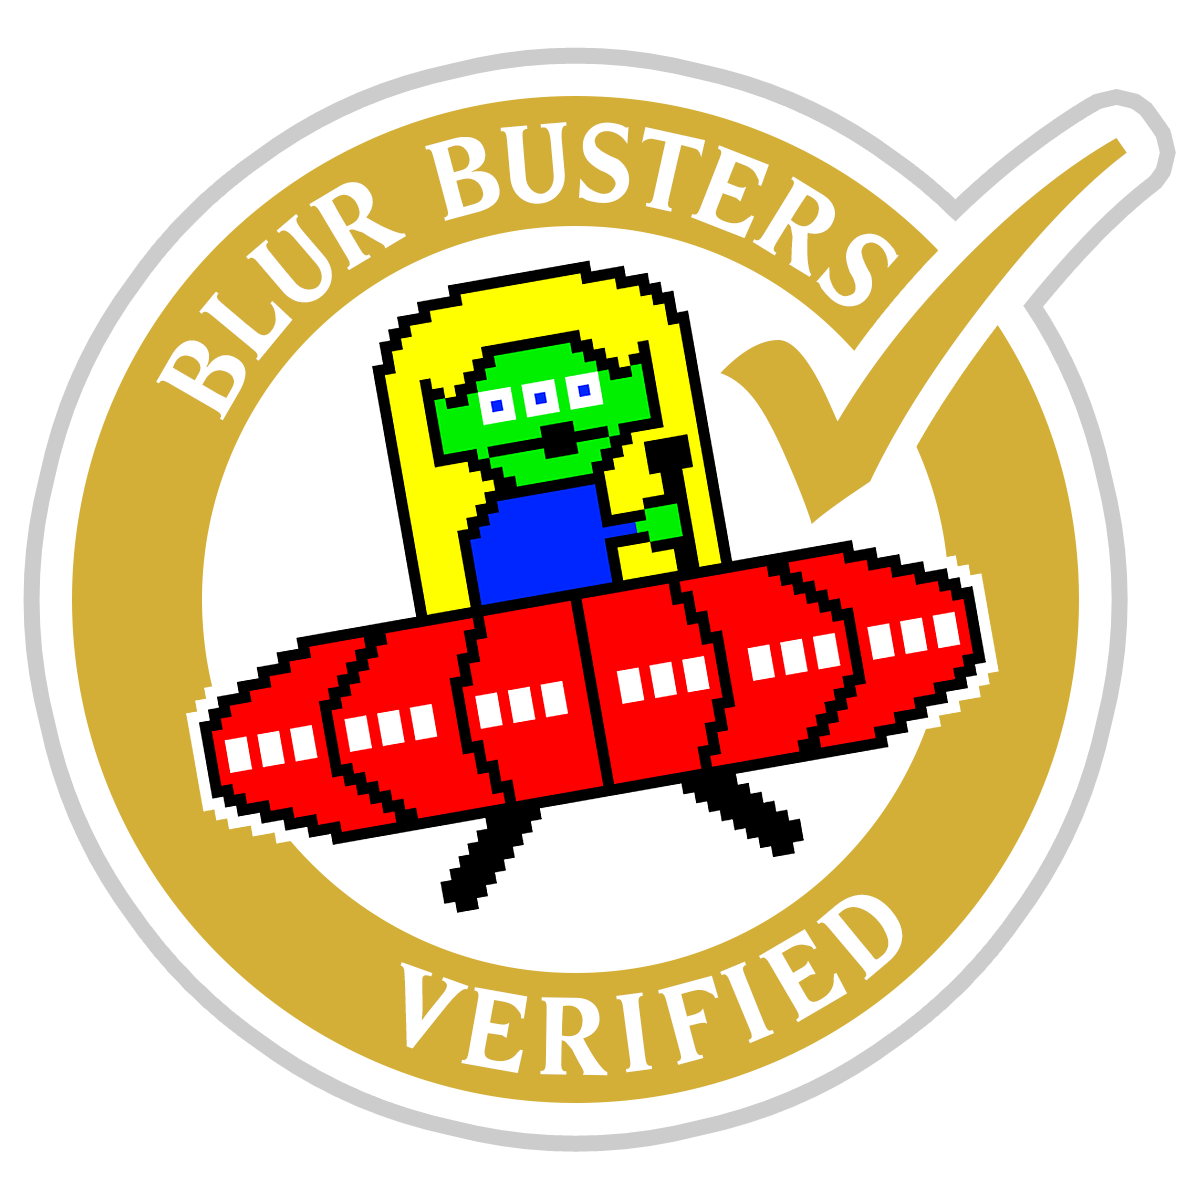 Logo certified by Blur Busters Verified Gold